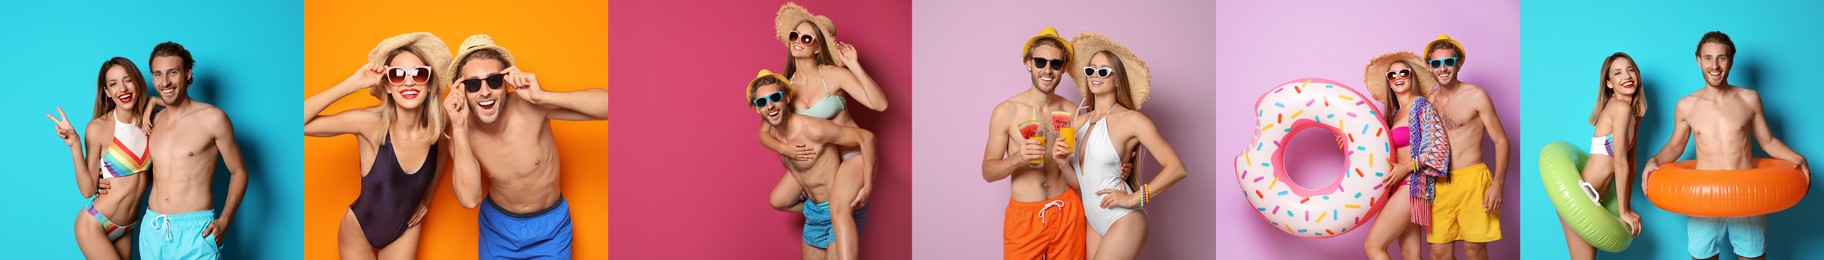 Collage with beautiful photos themed to summer party and vacation. Happy young couples wearing swimsuits on different color backgrounds, banner design